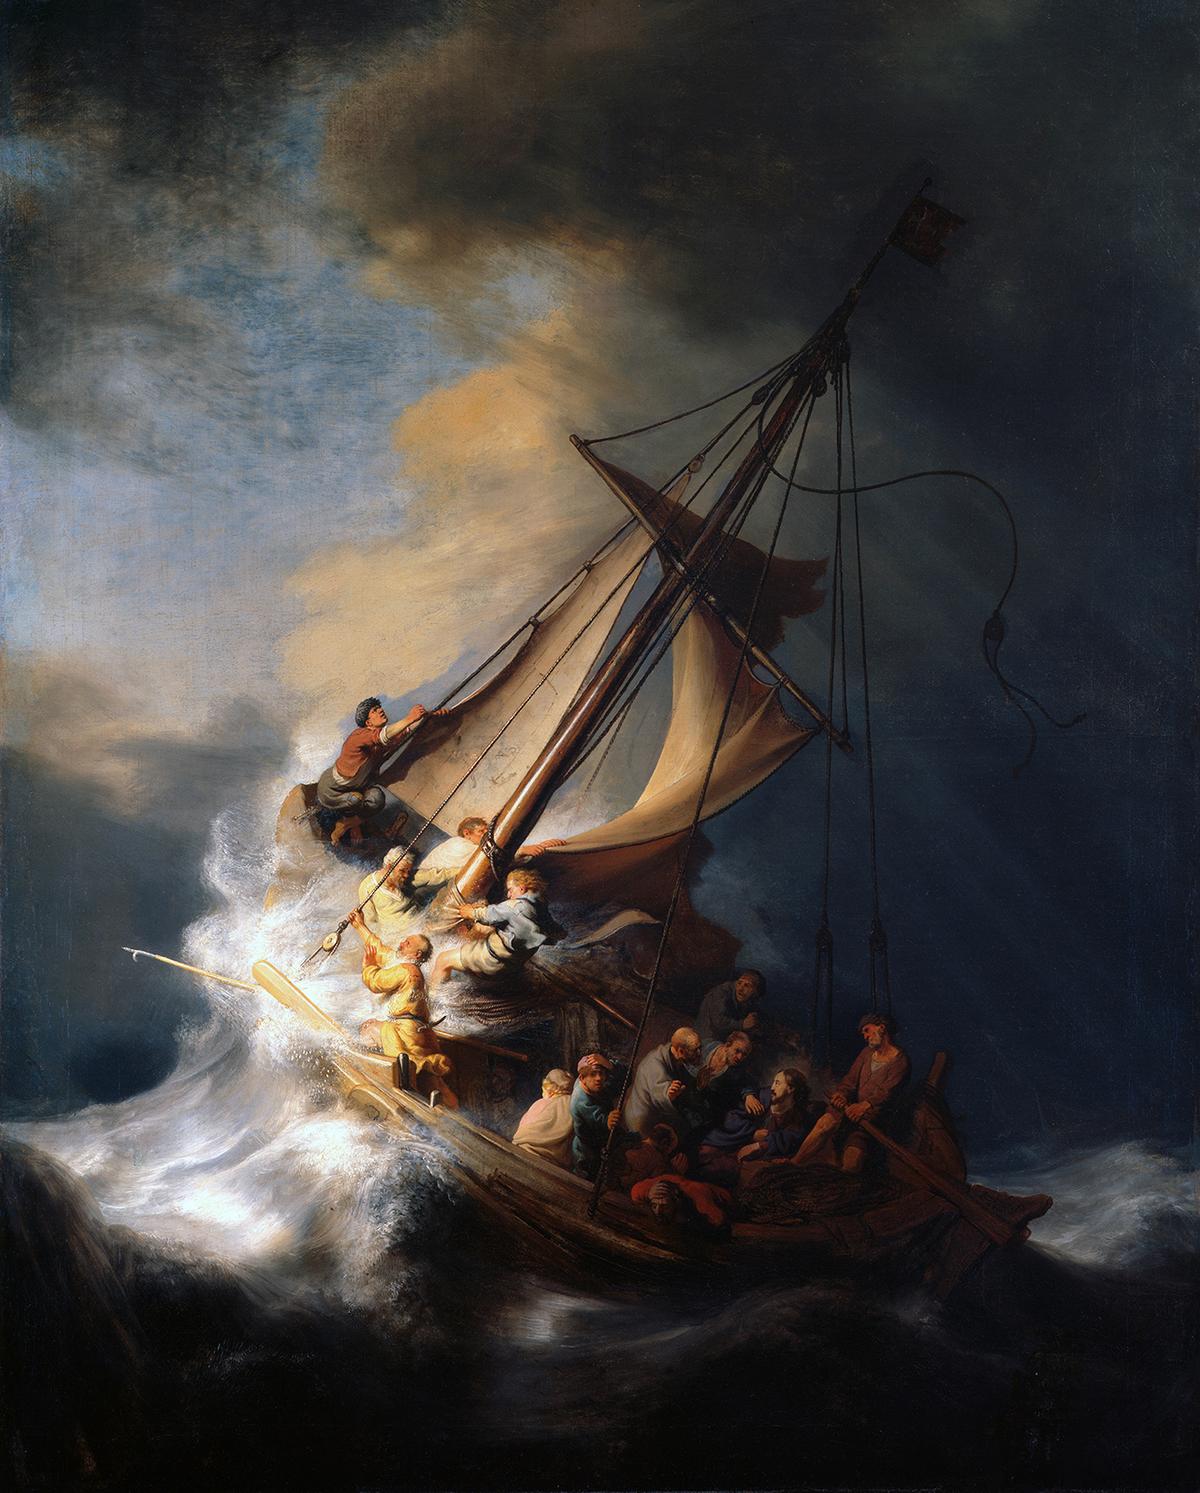 "Christ in the Storm on the Sea of Galilee," 1633, by Rembrandt. Oil on canvas; 63 inches by 50 3/8 inches. Stolen in 1990 from the Isabella Stewart Gardner Museum, Boston. (Public Domain)